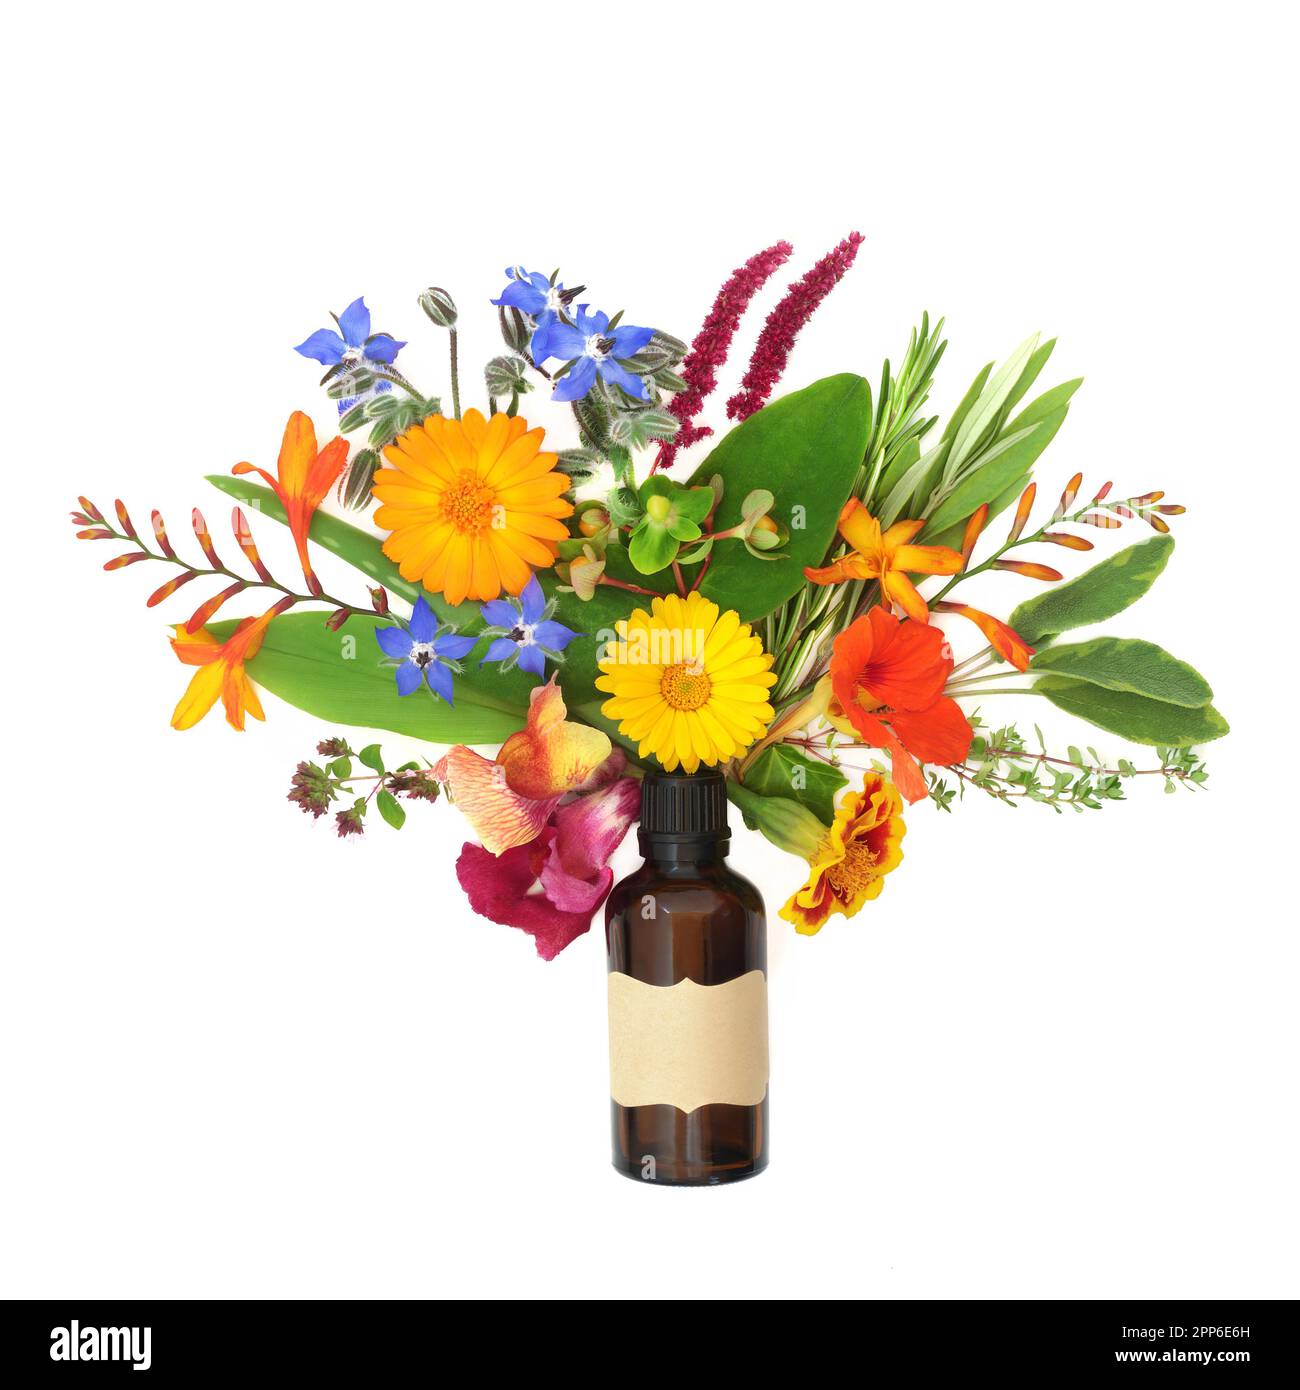 Freesia Flower Arrangement With Aromatherapy Essential Oil Bottle